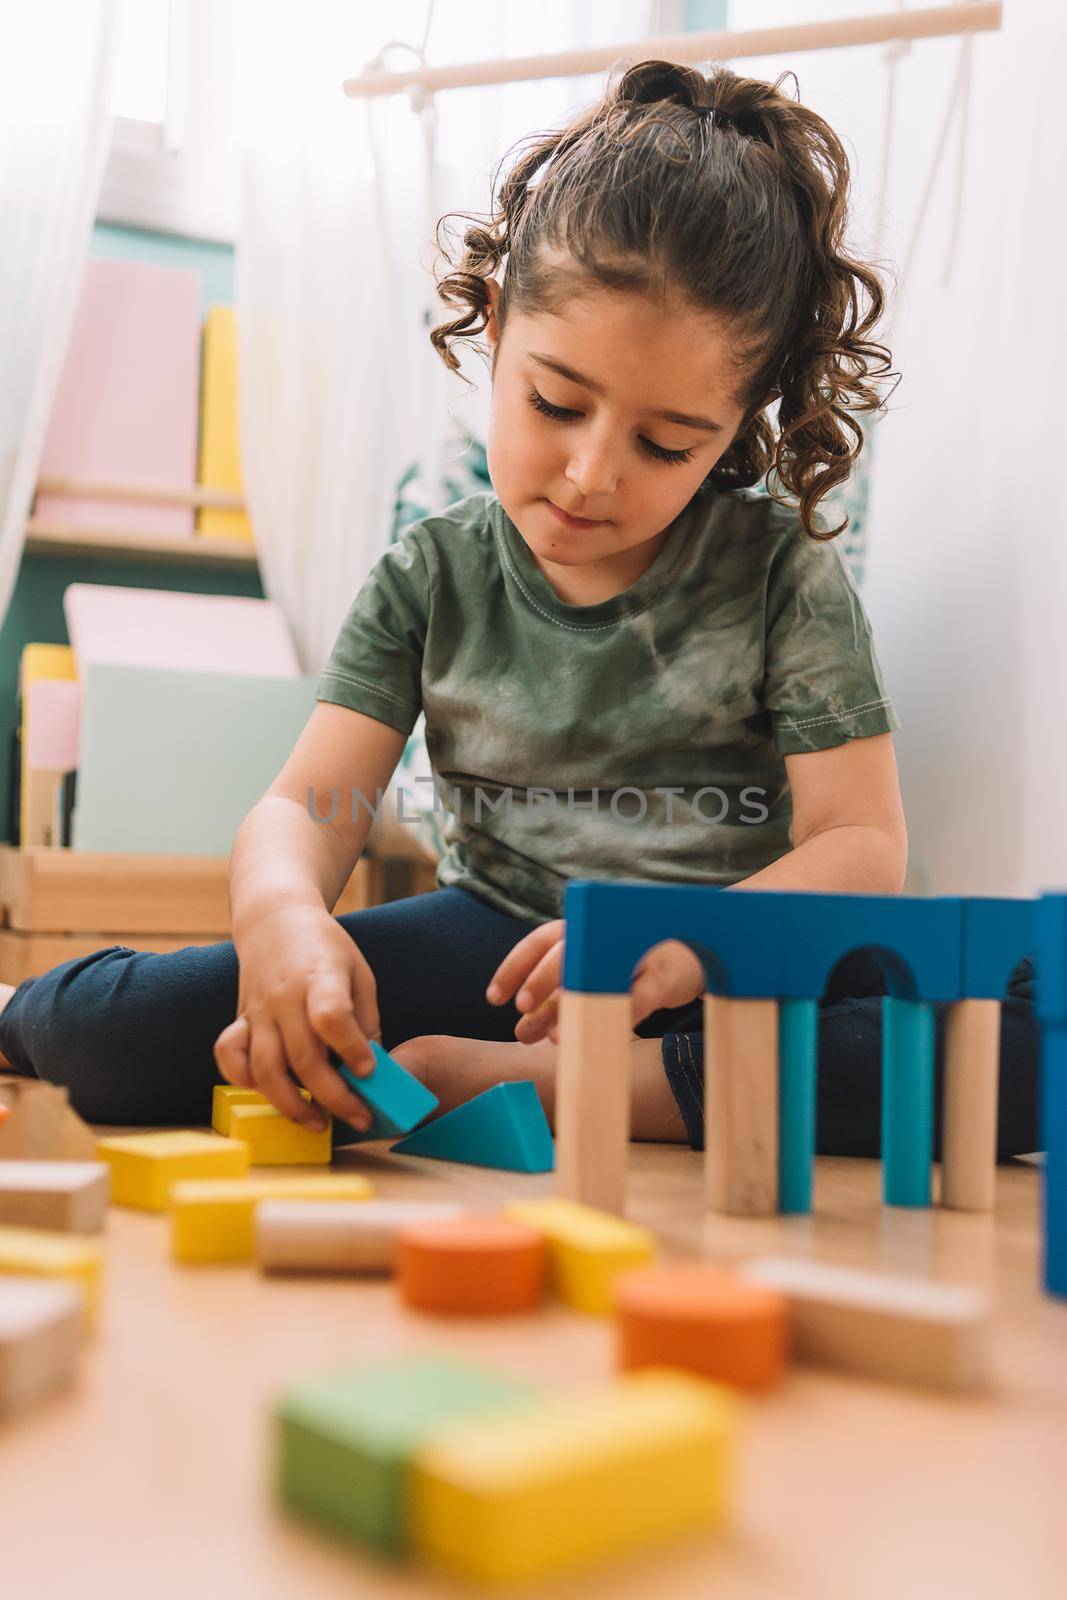 girl plays happy to build with building blocks by raulmelldo